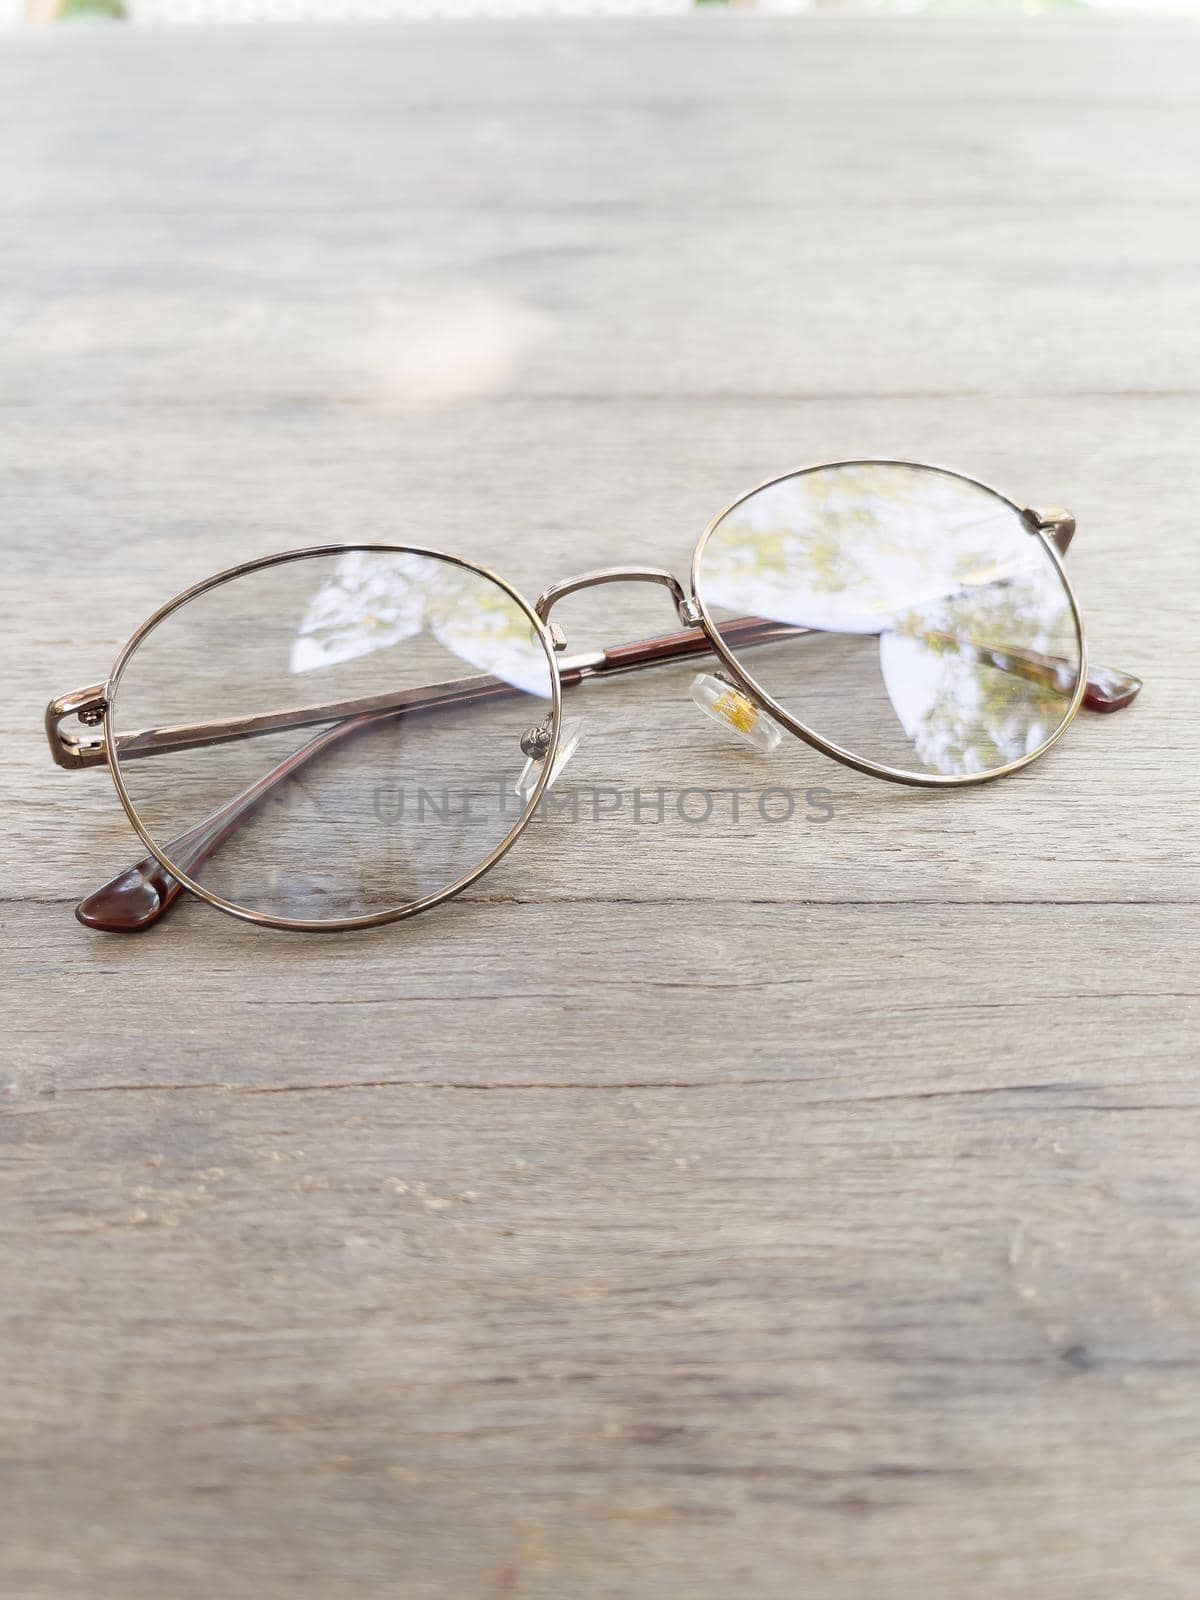 Eyeglasses on old wooden table by punsayaporn